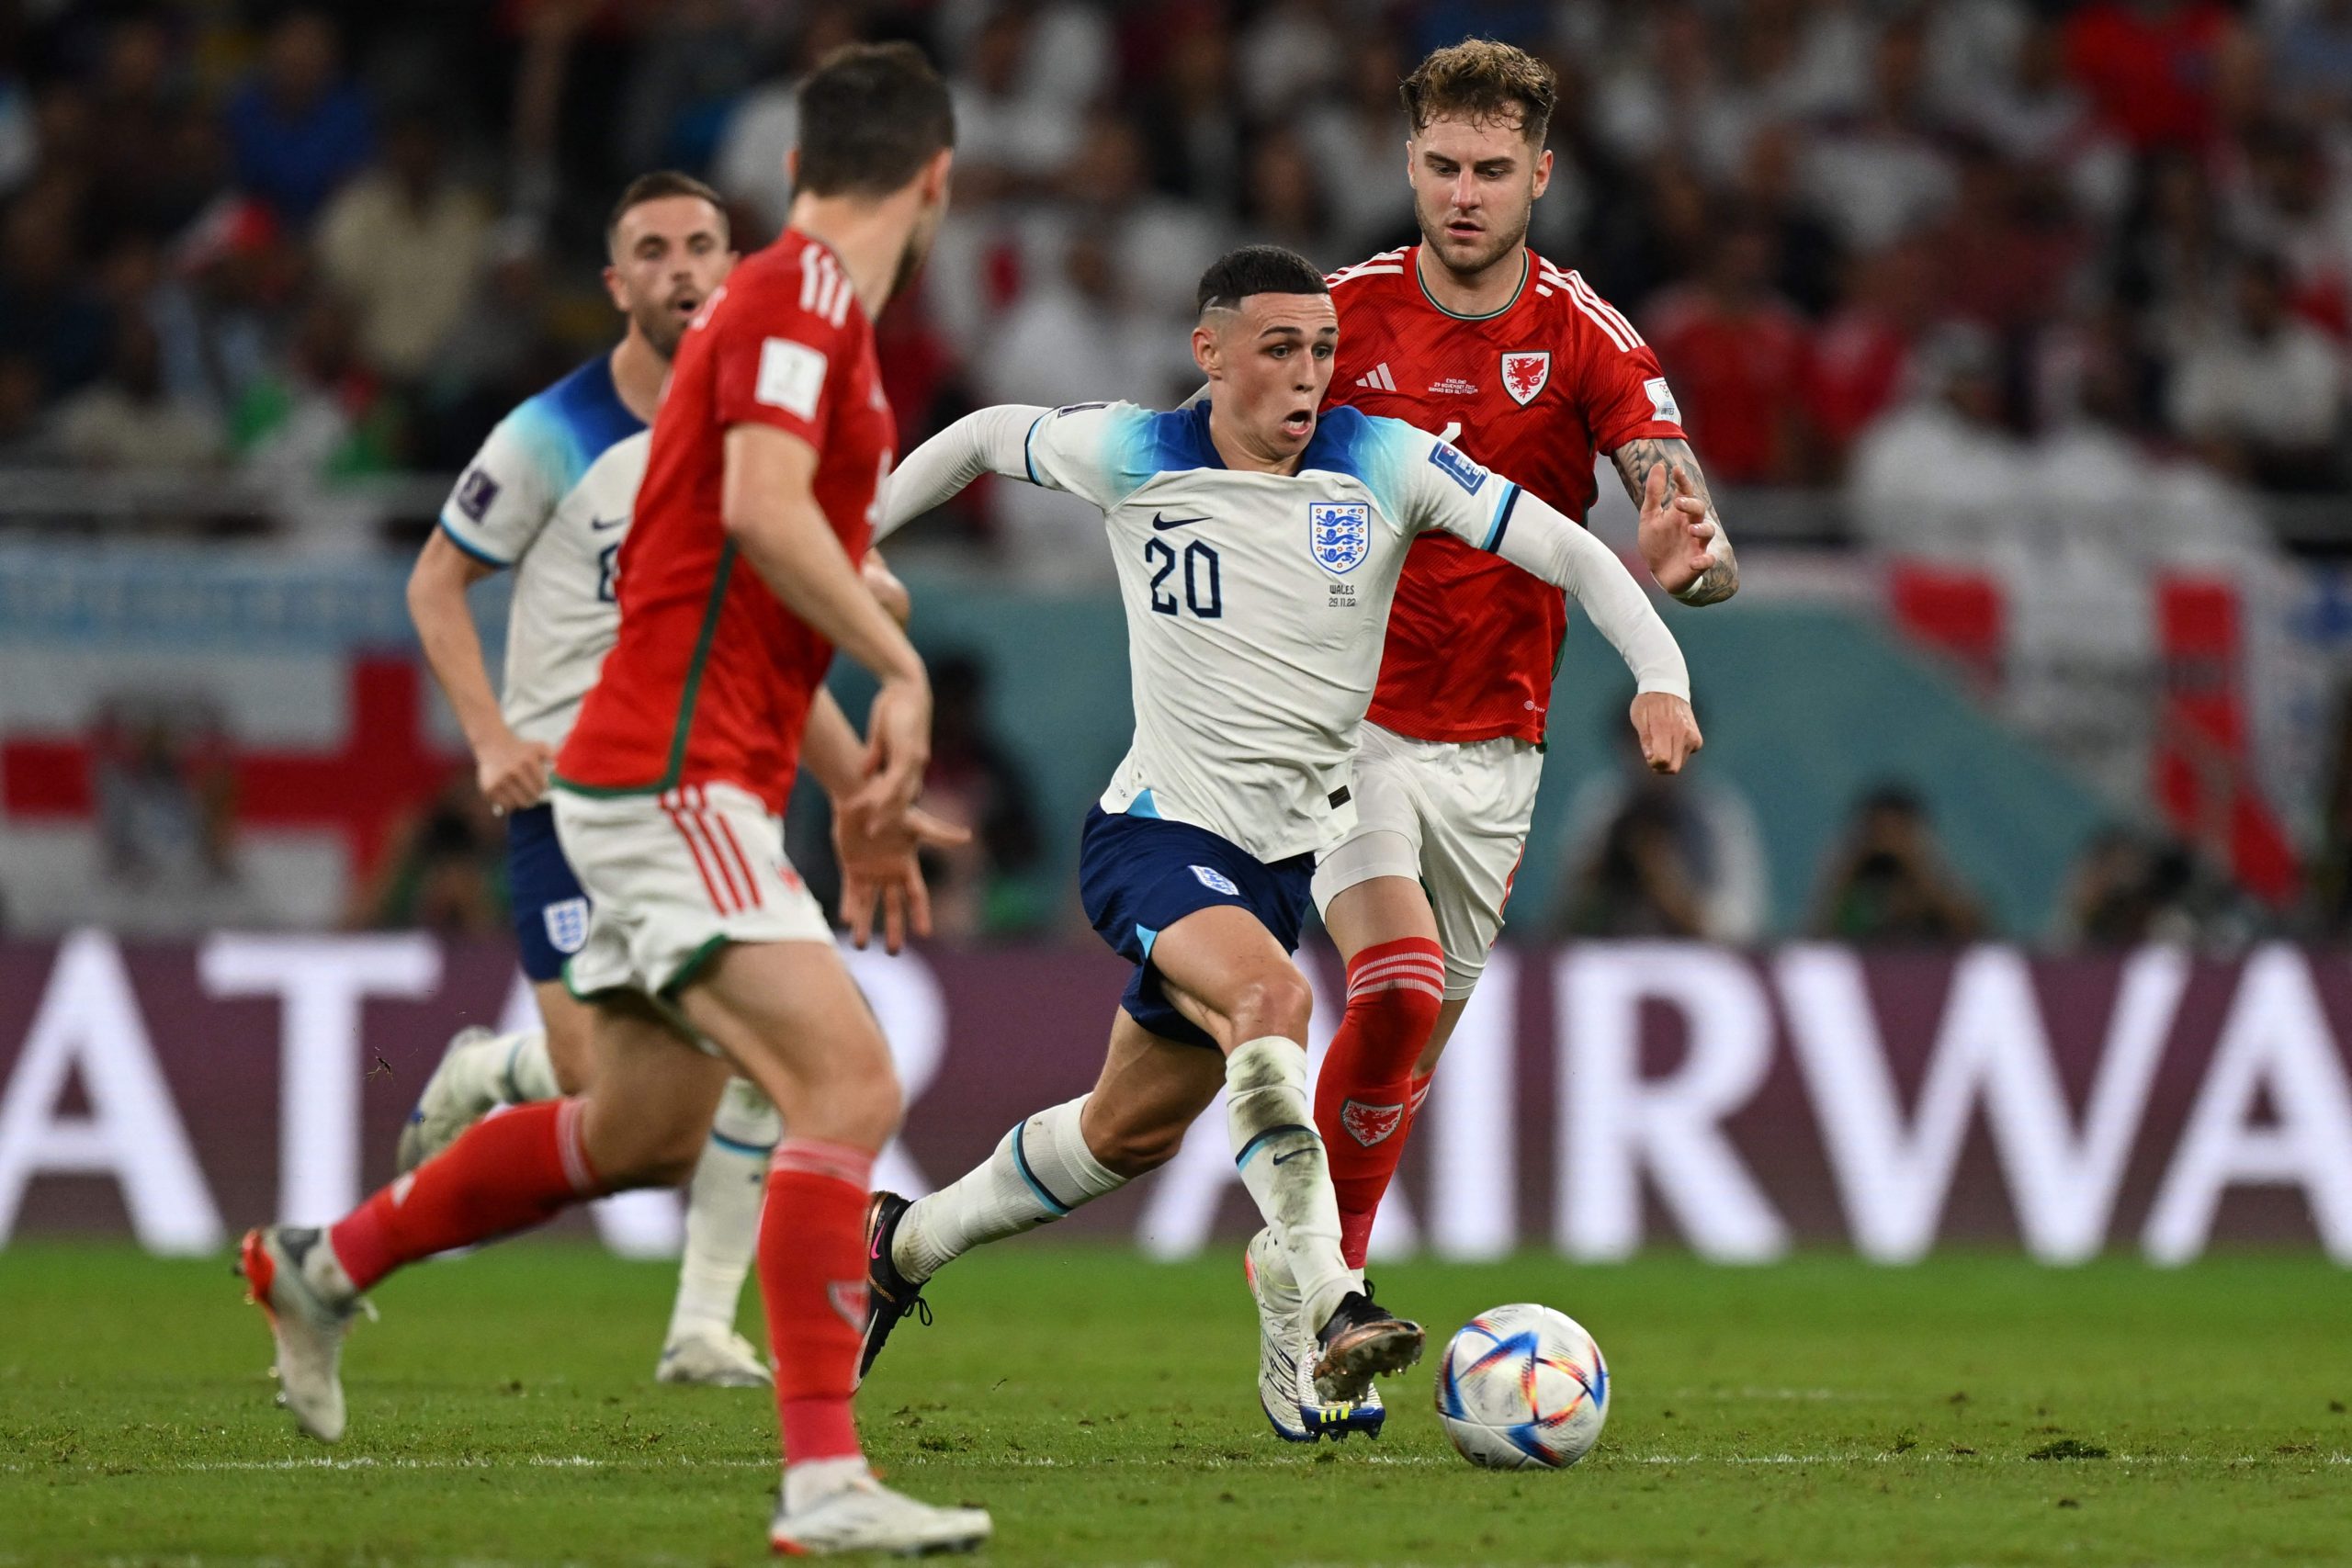 England's forward Phil Foden is marked by Wales' defenders Joe Rodon and Ben Davies. (Photo by ANDREJ ISAKOVIC/AFP via Getty Images)